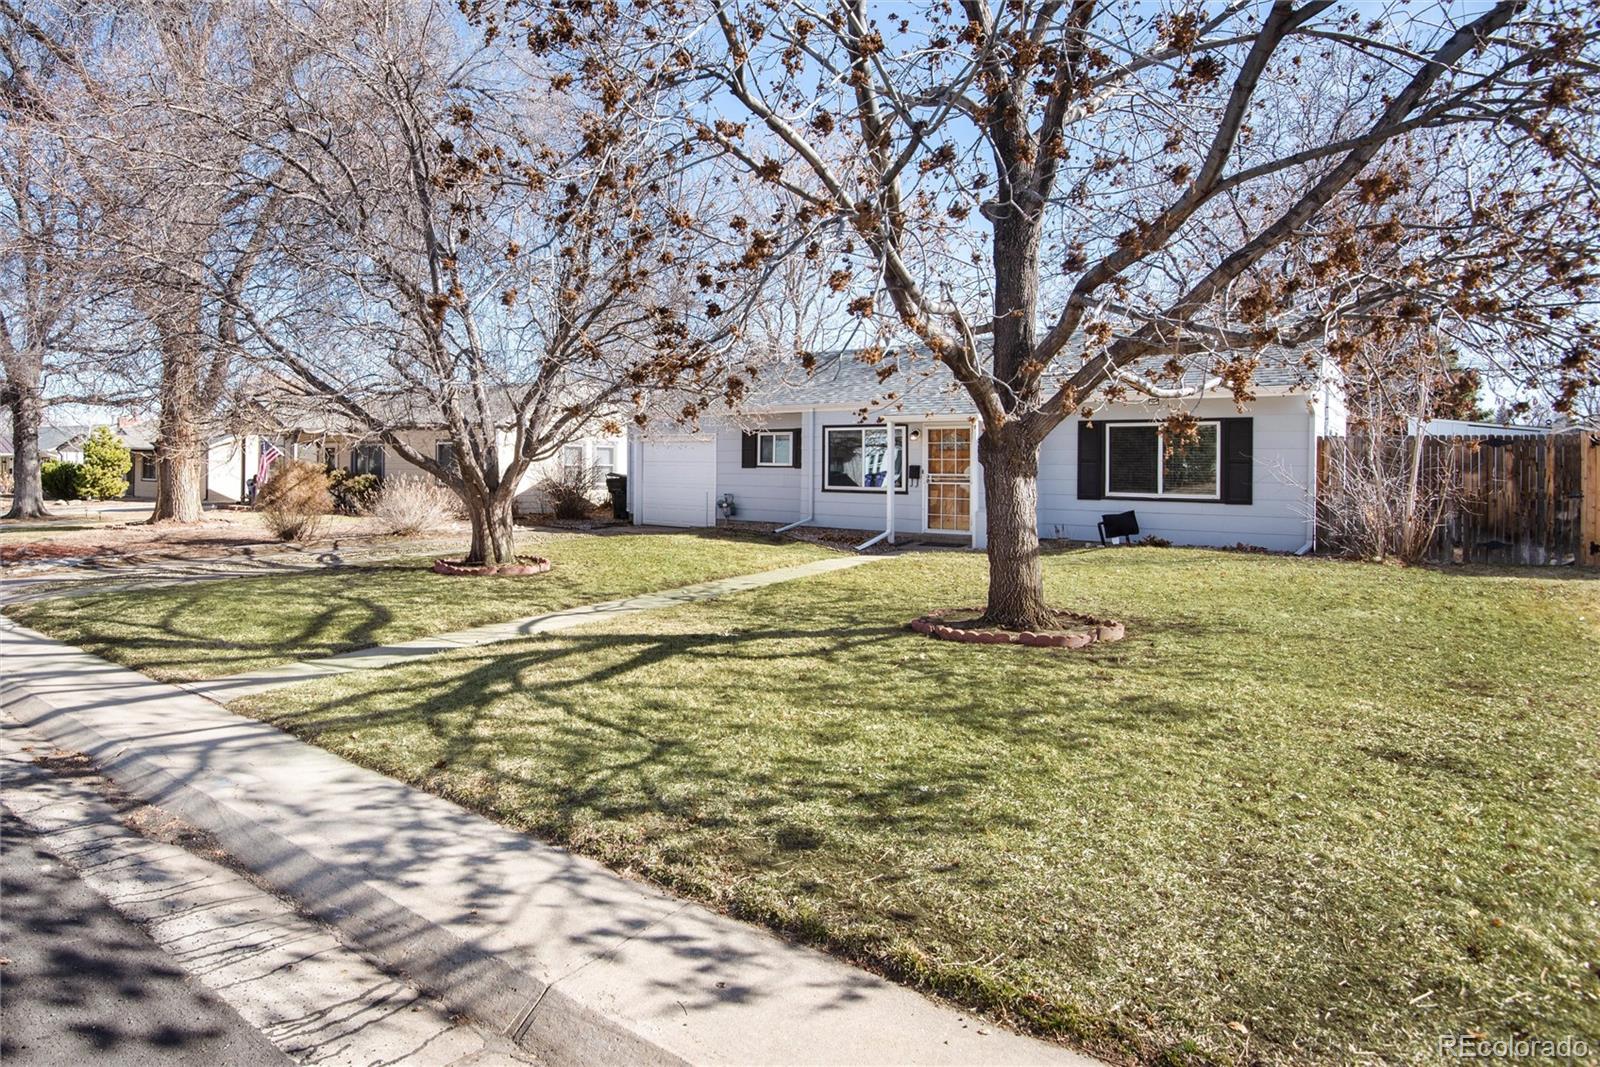 3020 s forest street, Denver sold home. Closed on 2024-04-22 for $509,600.